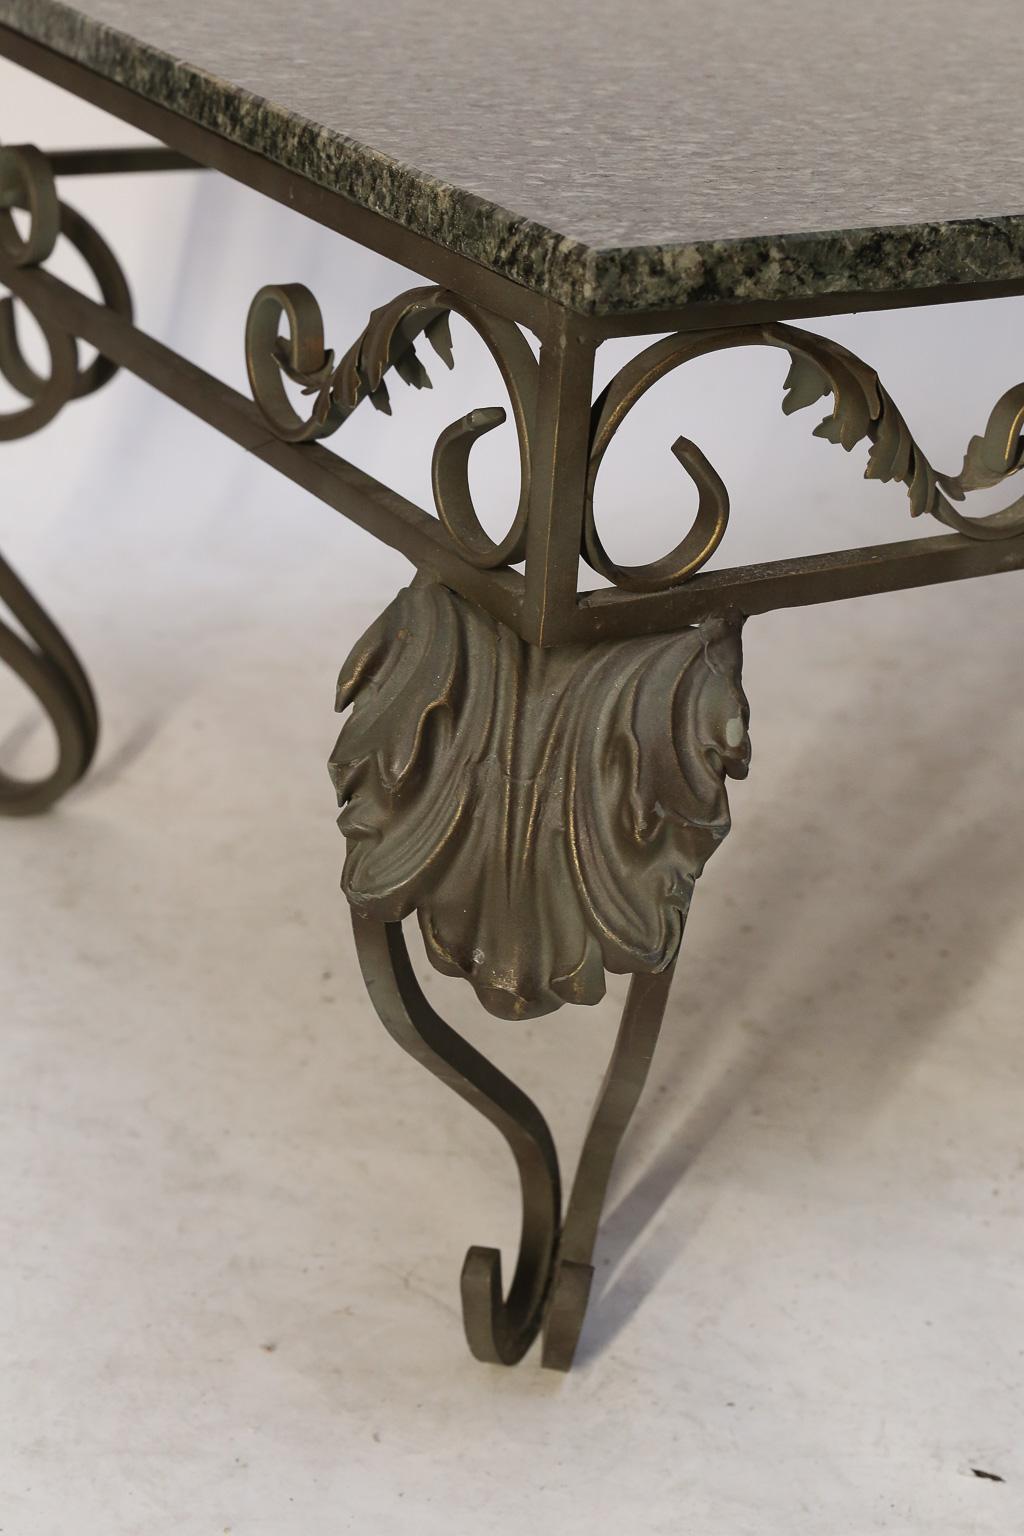 Wrought iron cocktail table base with cabriole legs features a filigree apron with acanthus leaves
details in the corners.

Top is green and black granite.
 